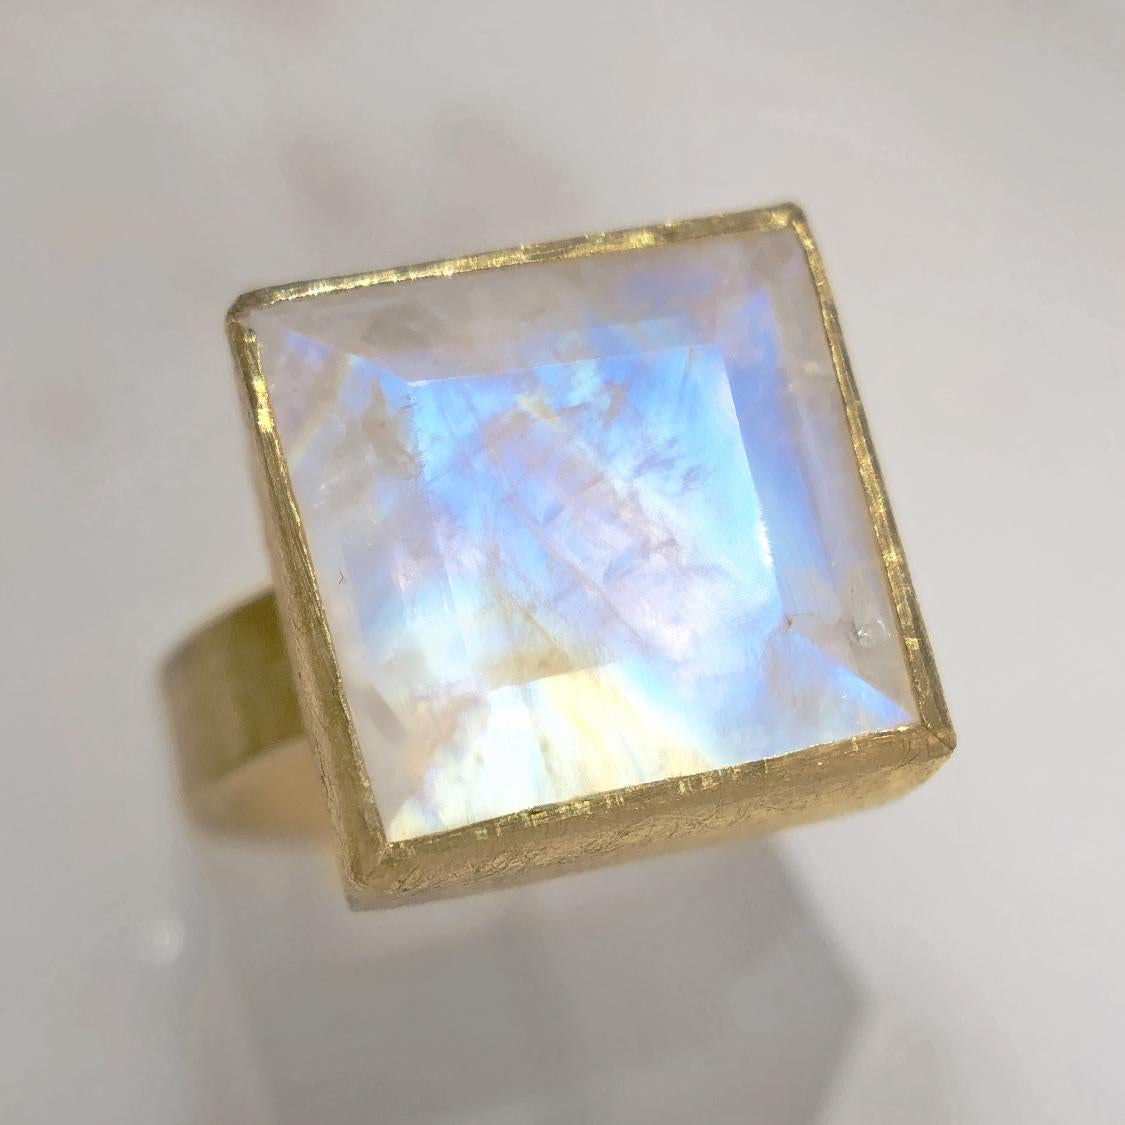 One of a Kind Ring handmade by acclaimed jewelry artist Petra Class in signature finely-textured 22k featuring a spectacular 6.3 carat faceted rainbow moonstone square bezel-set atop a 4mm wide 18k yellow gold band. Size 7.0 (can be sized). Stamped